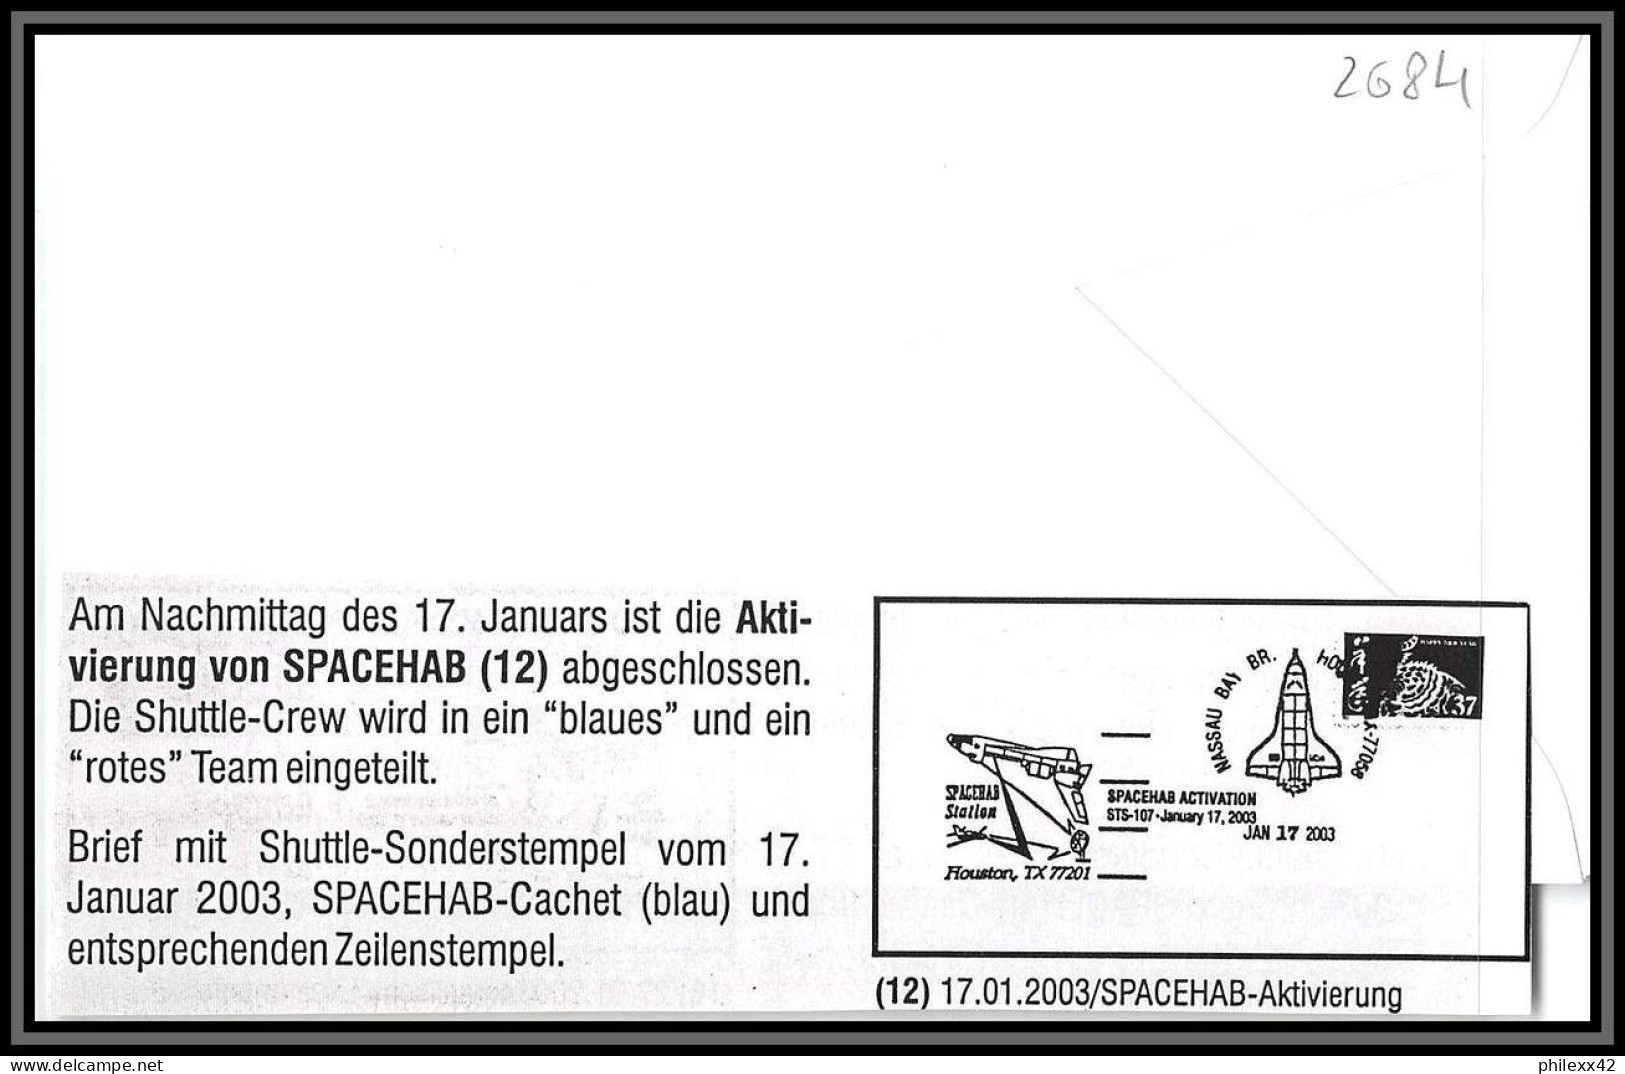 2684 Espace (space Raumfahrt) Lettre (cover) USA- Sts-107 Columbia Shuttle (navette) SPACEHAB Activation 17/1/2003  - USA